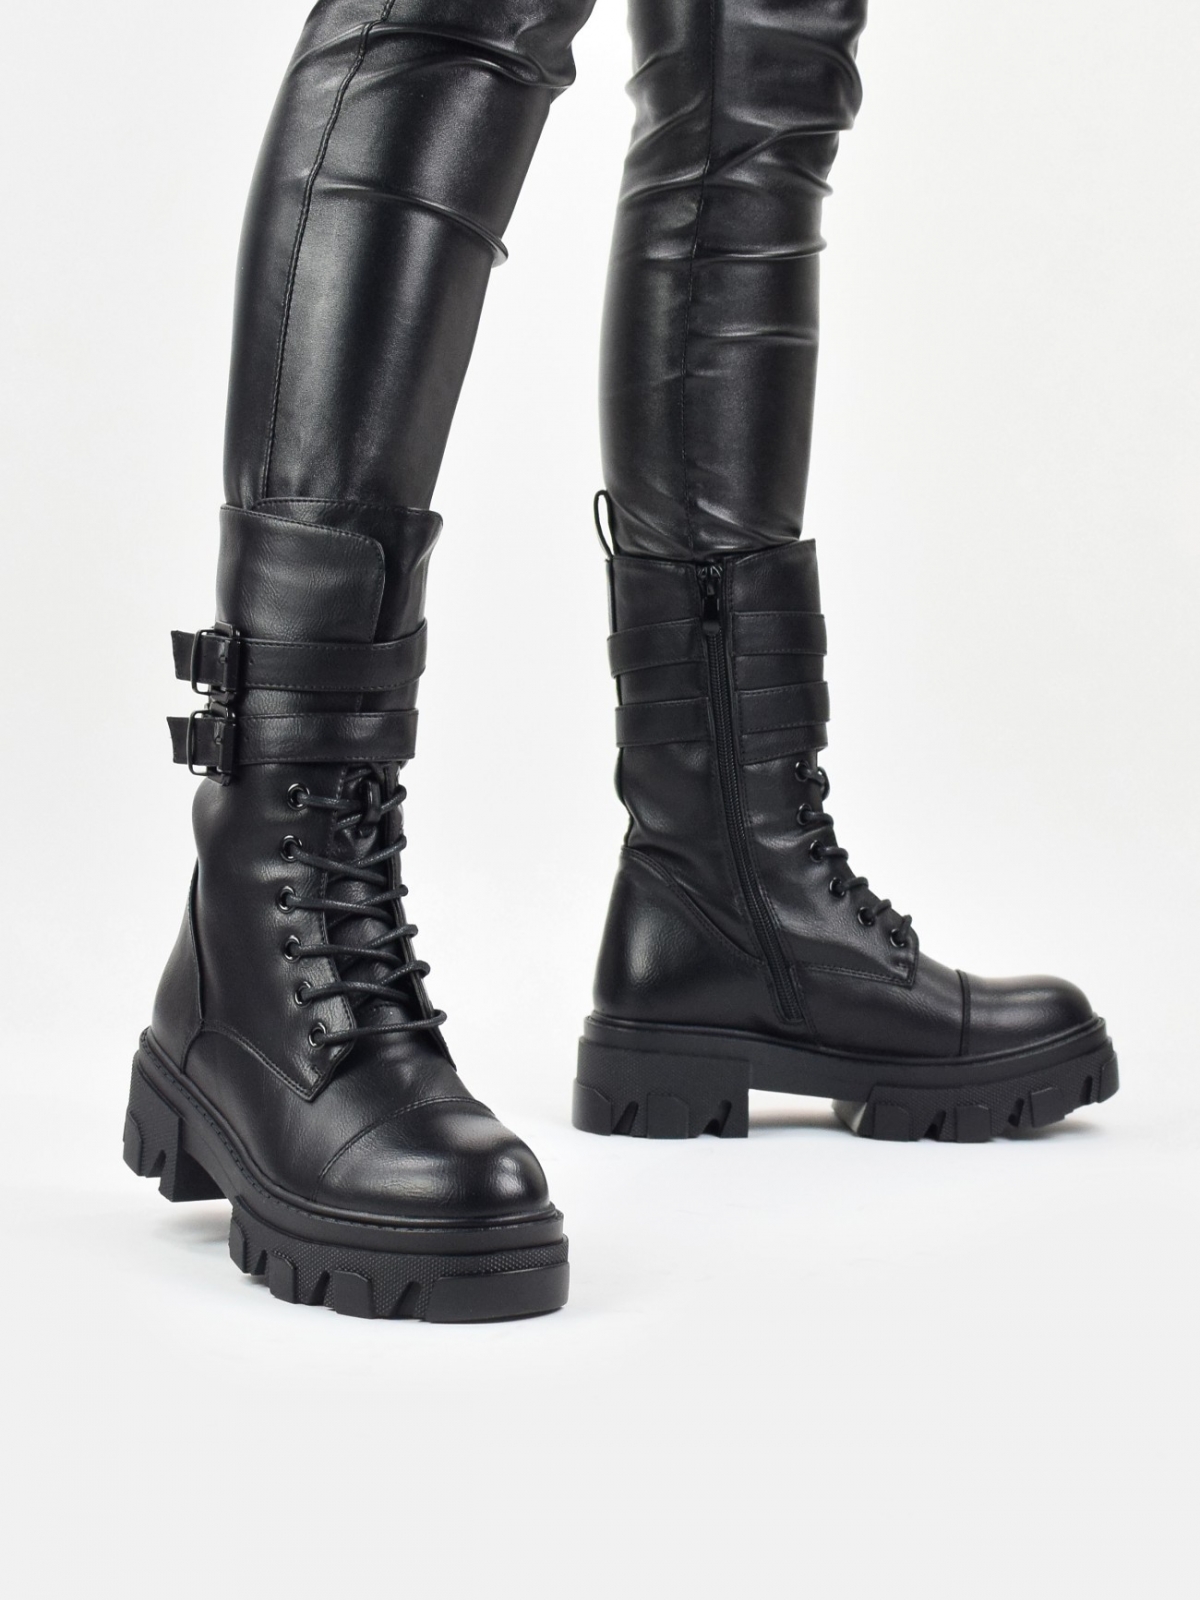 Women's boots in black with buckle details